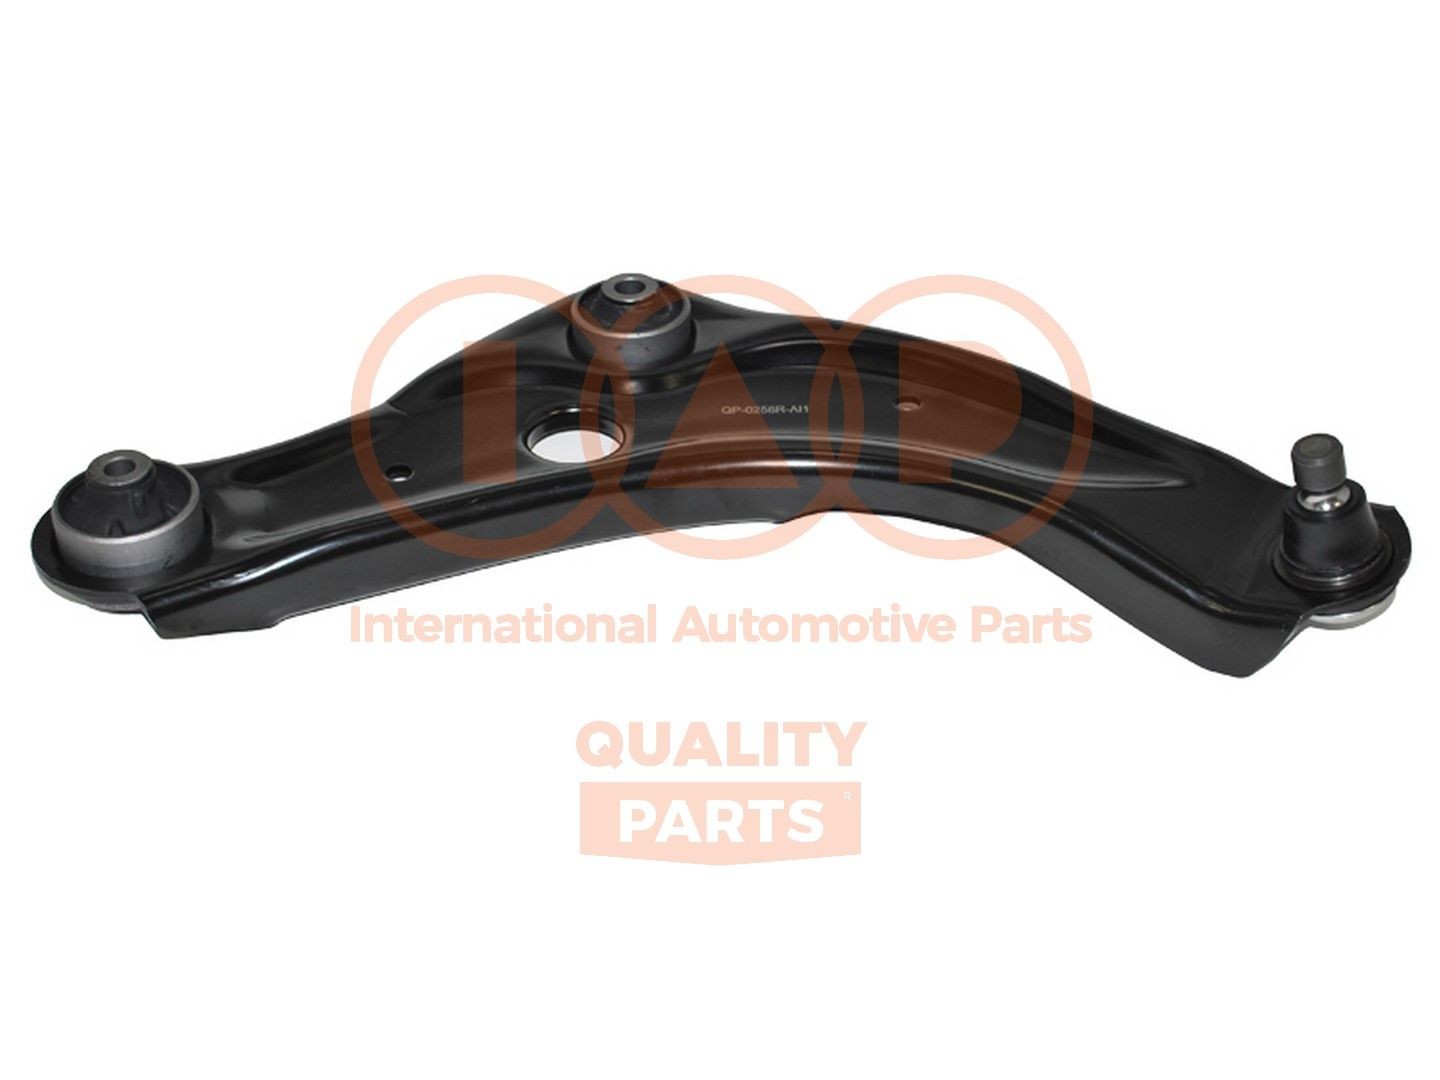 Toyota AVENSIS Cv joint 14689053 IAP QUALITY PARTS 406-17057 online buy